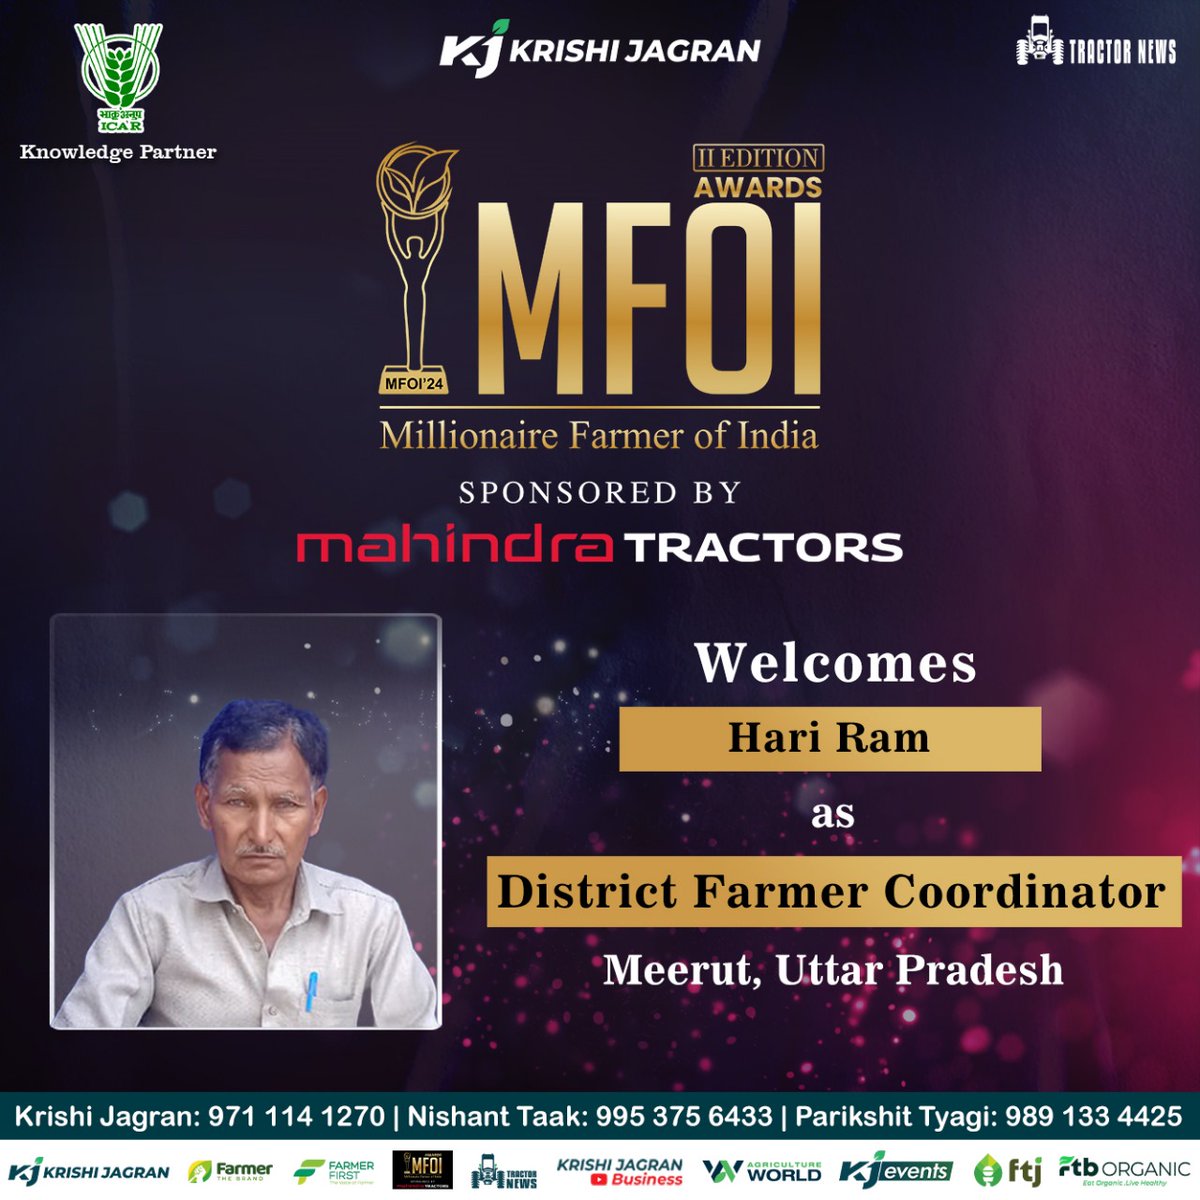 Krishi Jagran is honored to welcome to Mr. Hari Ram who will serve as the District Farmer Coordinator for Meerut, Uttar Pradesh in the II Edition of the Millionaire Farmer of India, sponsored by Mahindra Tractors. Click on the following link for Registration